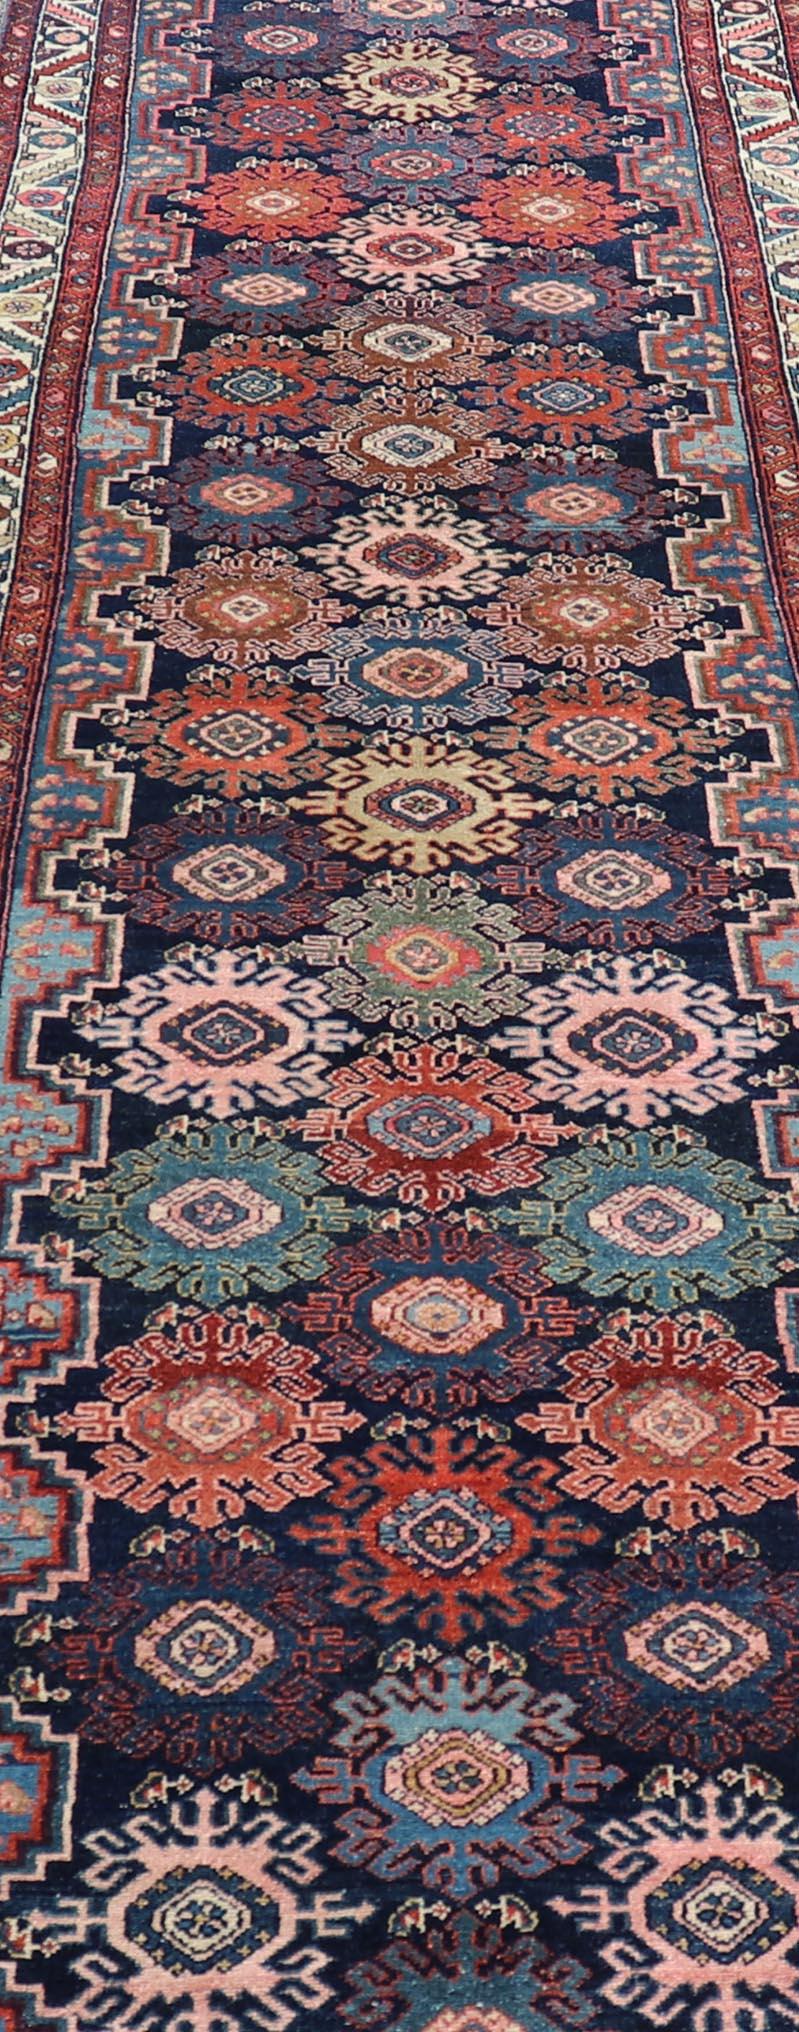 Antique Persian Hamadan Runner with All-Over Geometric Motifs In Jewel Tones For Sale 3